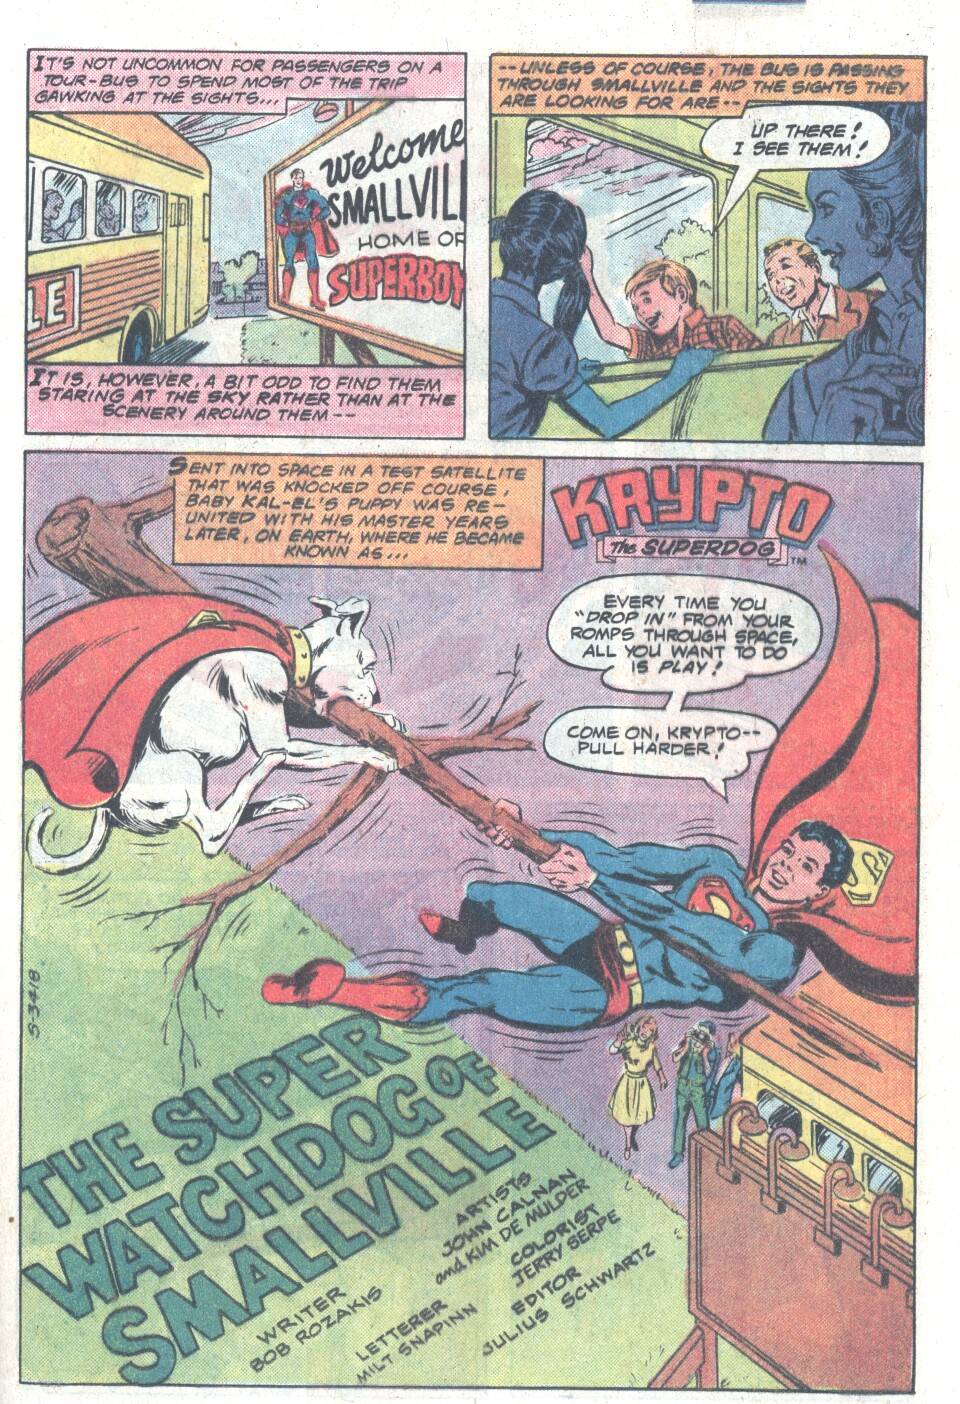 The New Adventures of Superboy 10 Page 18